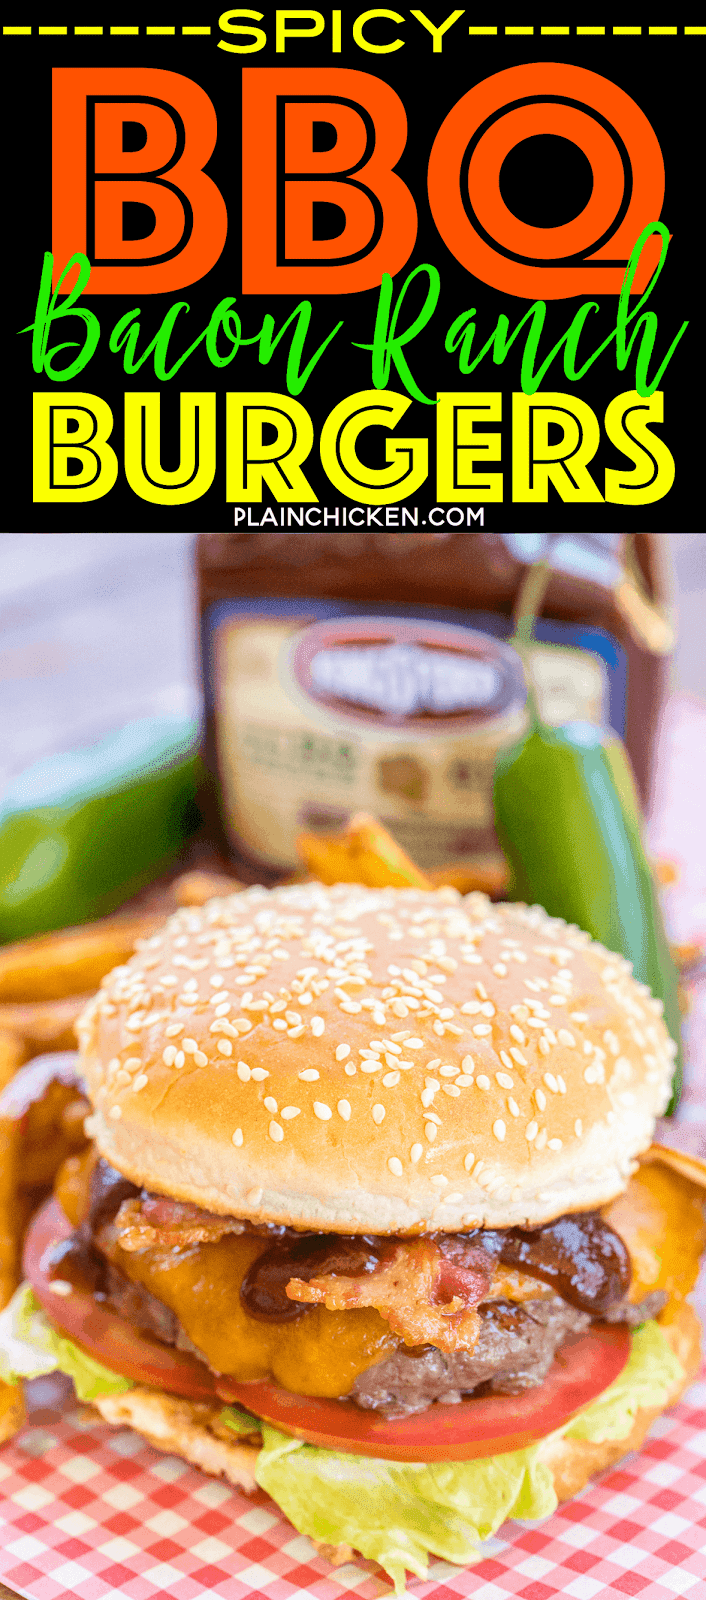 Spicy BBQ Ranch Burgers - seriously delicious! SO easy and they taste AMAZING!!! We grilled these for a party and everyone RAVED about them!! Ground Beef, Ranch mix, cheddar cheese, lettuce, tomato, bacon and Kingsford® Honey Jalapeño Mesquite BBQ Sauce. Sweet and a little spicy! A new favorite!